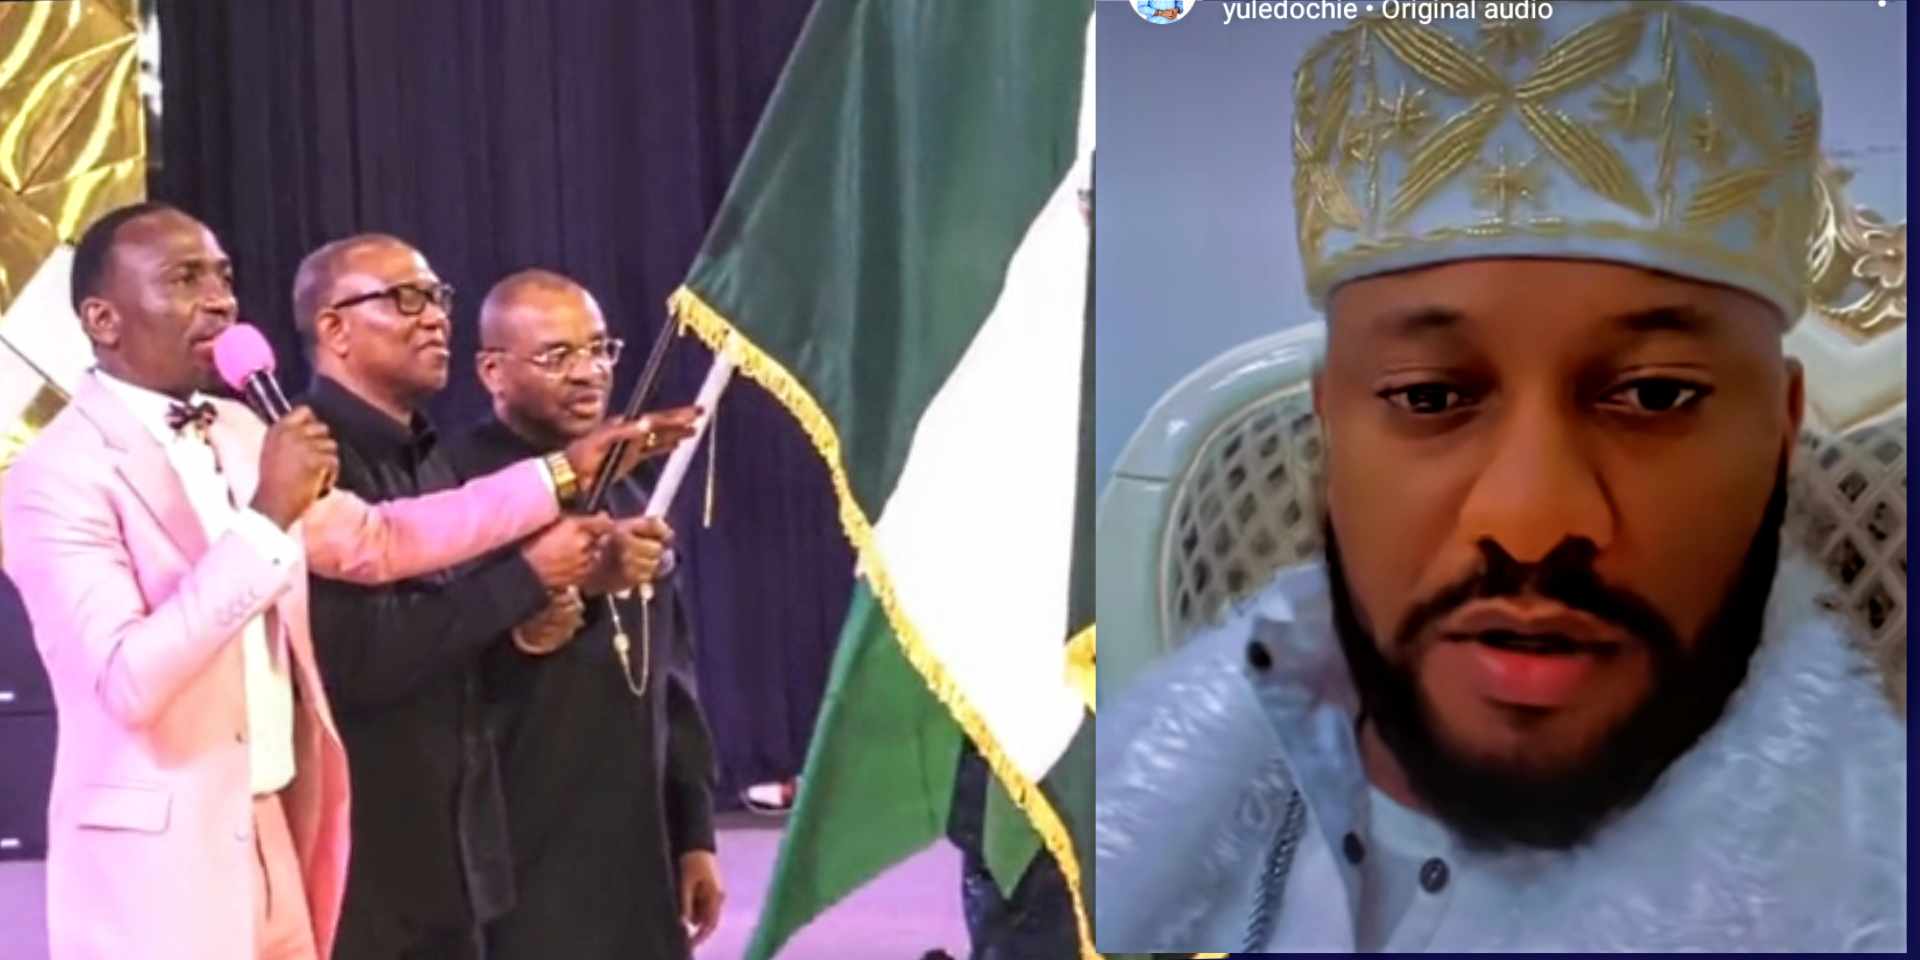 "Pray for Nigeria" - Yul Edochie urge Nigerians following Peter Obi, Gov Udom, Enenche's joint prayer session [Video]